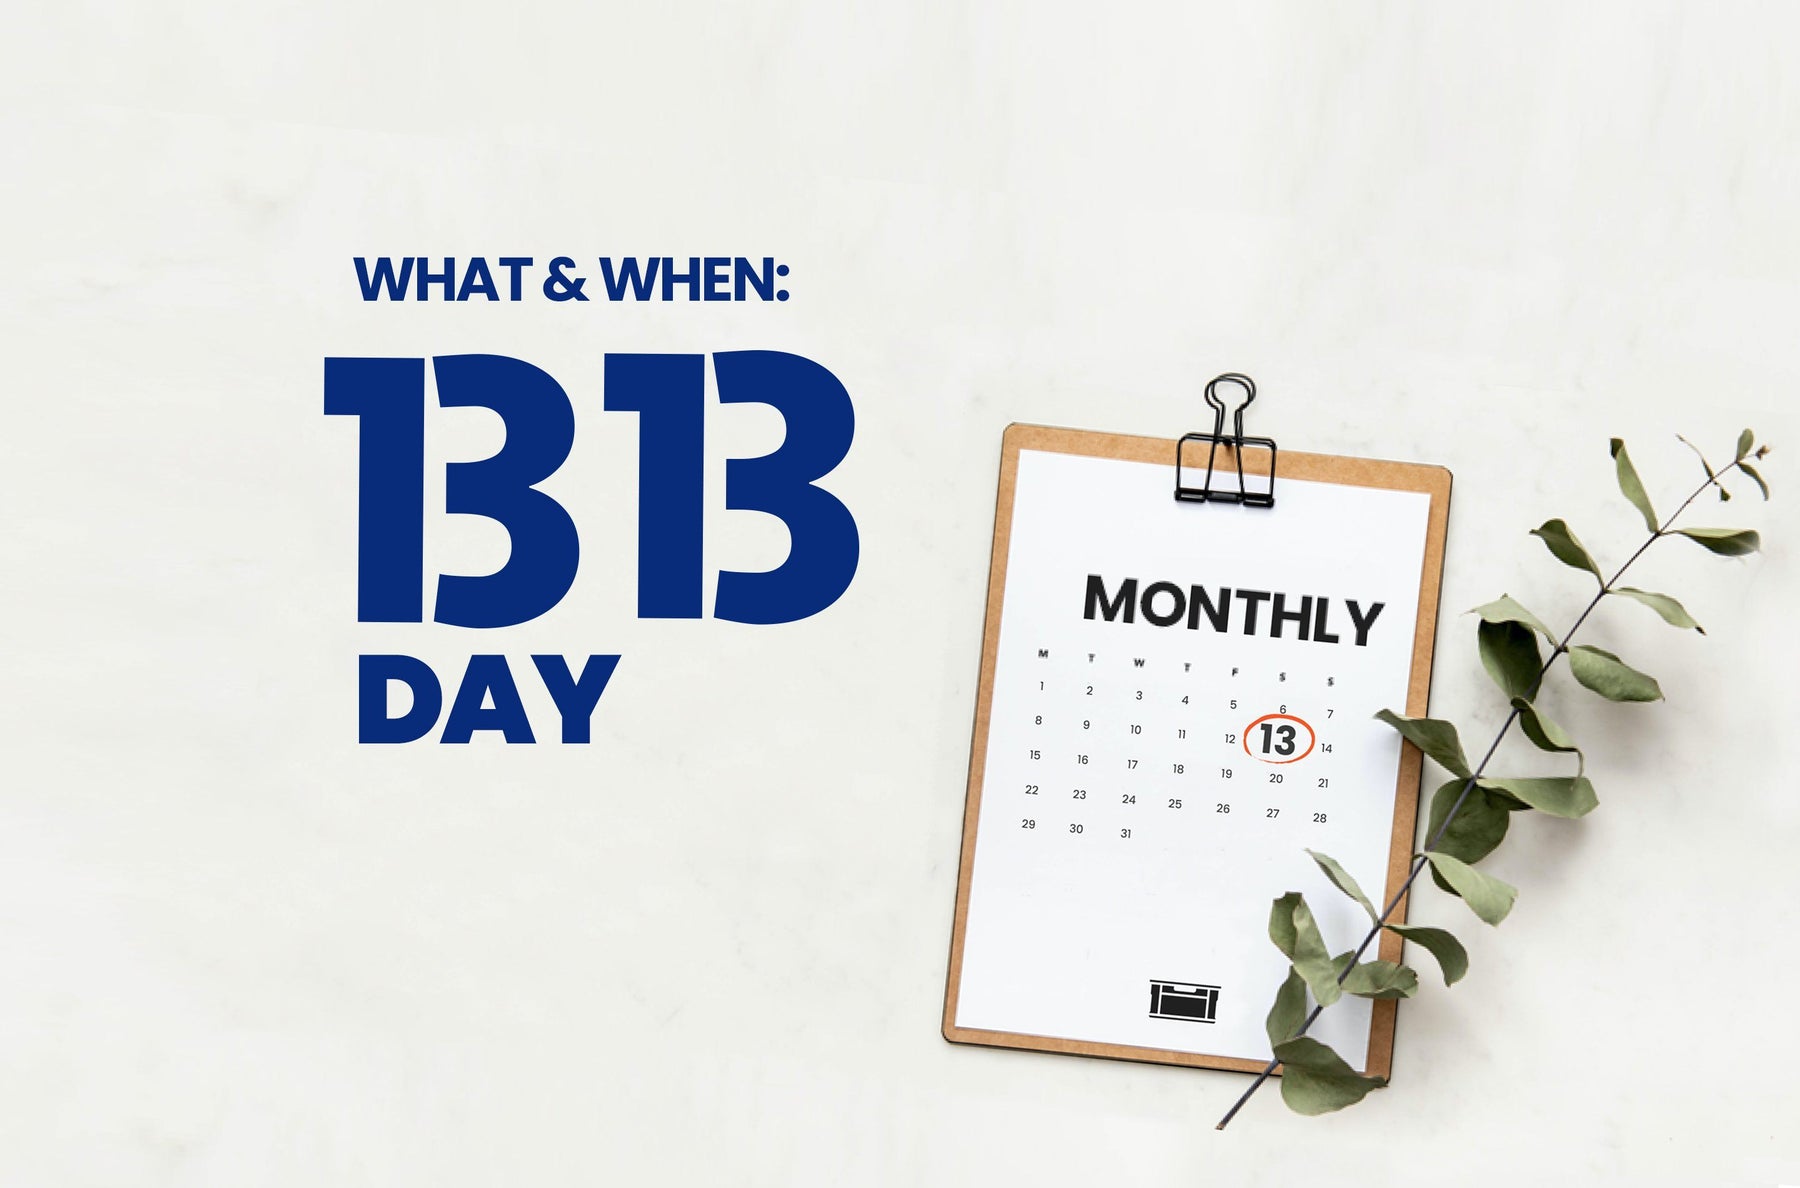 BB Day: What Is It and When?